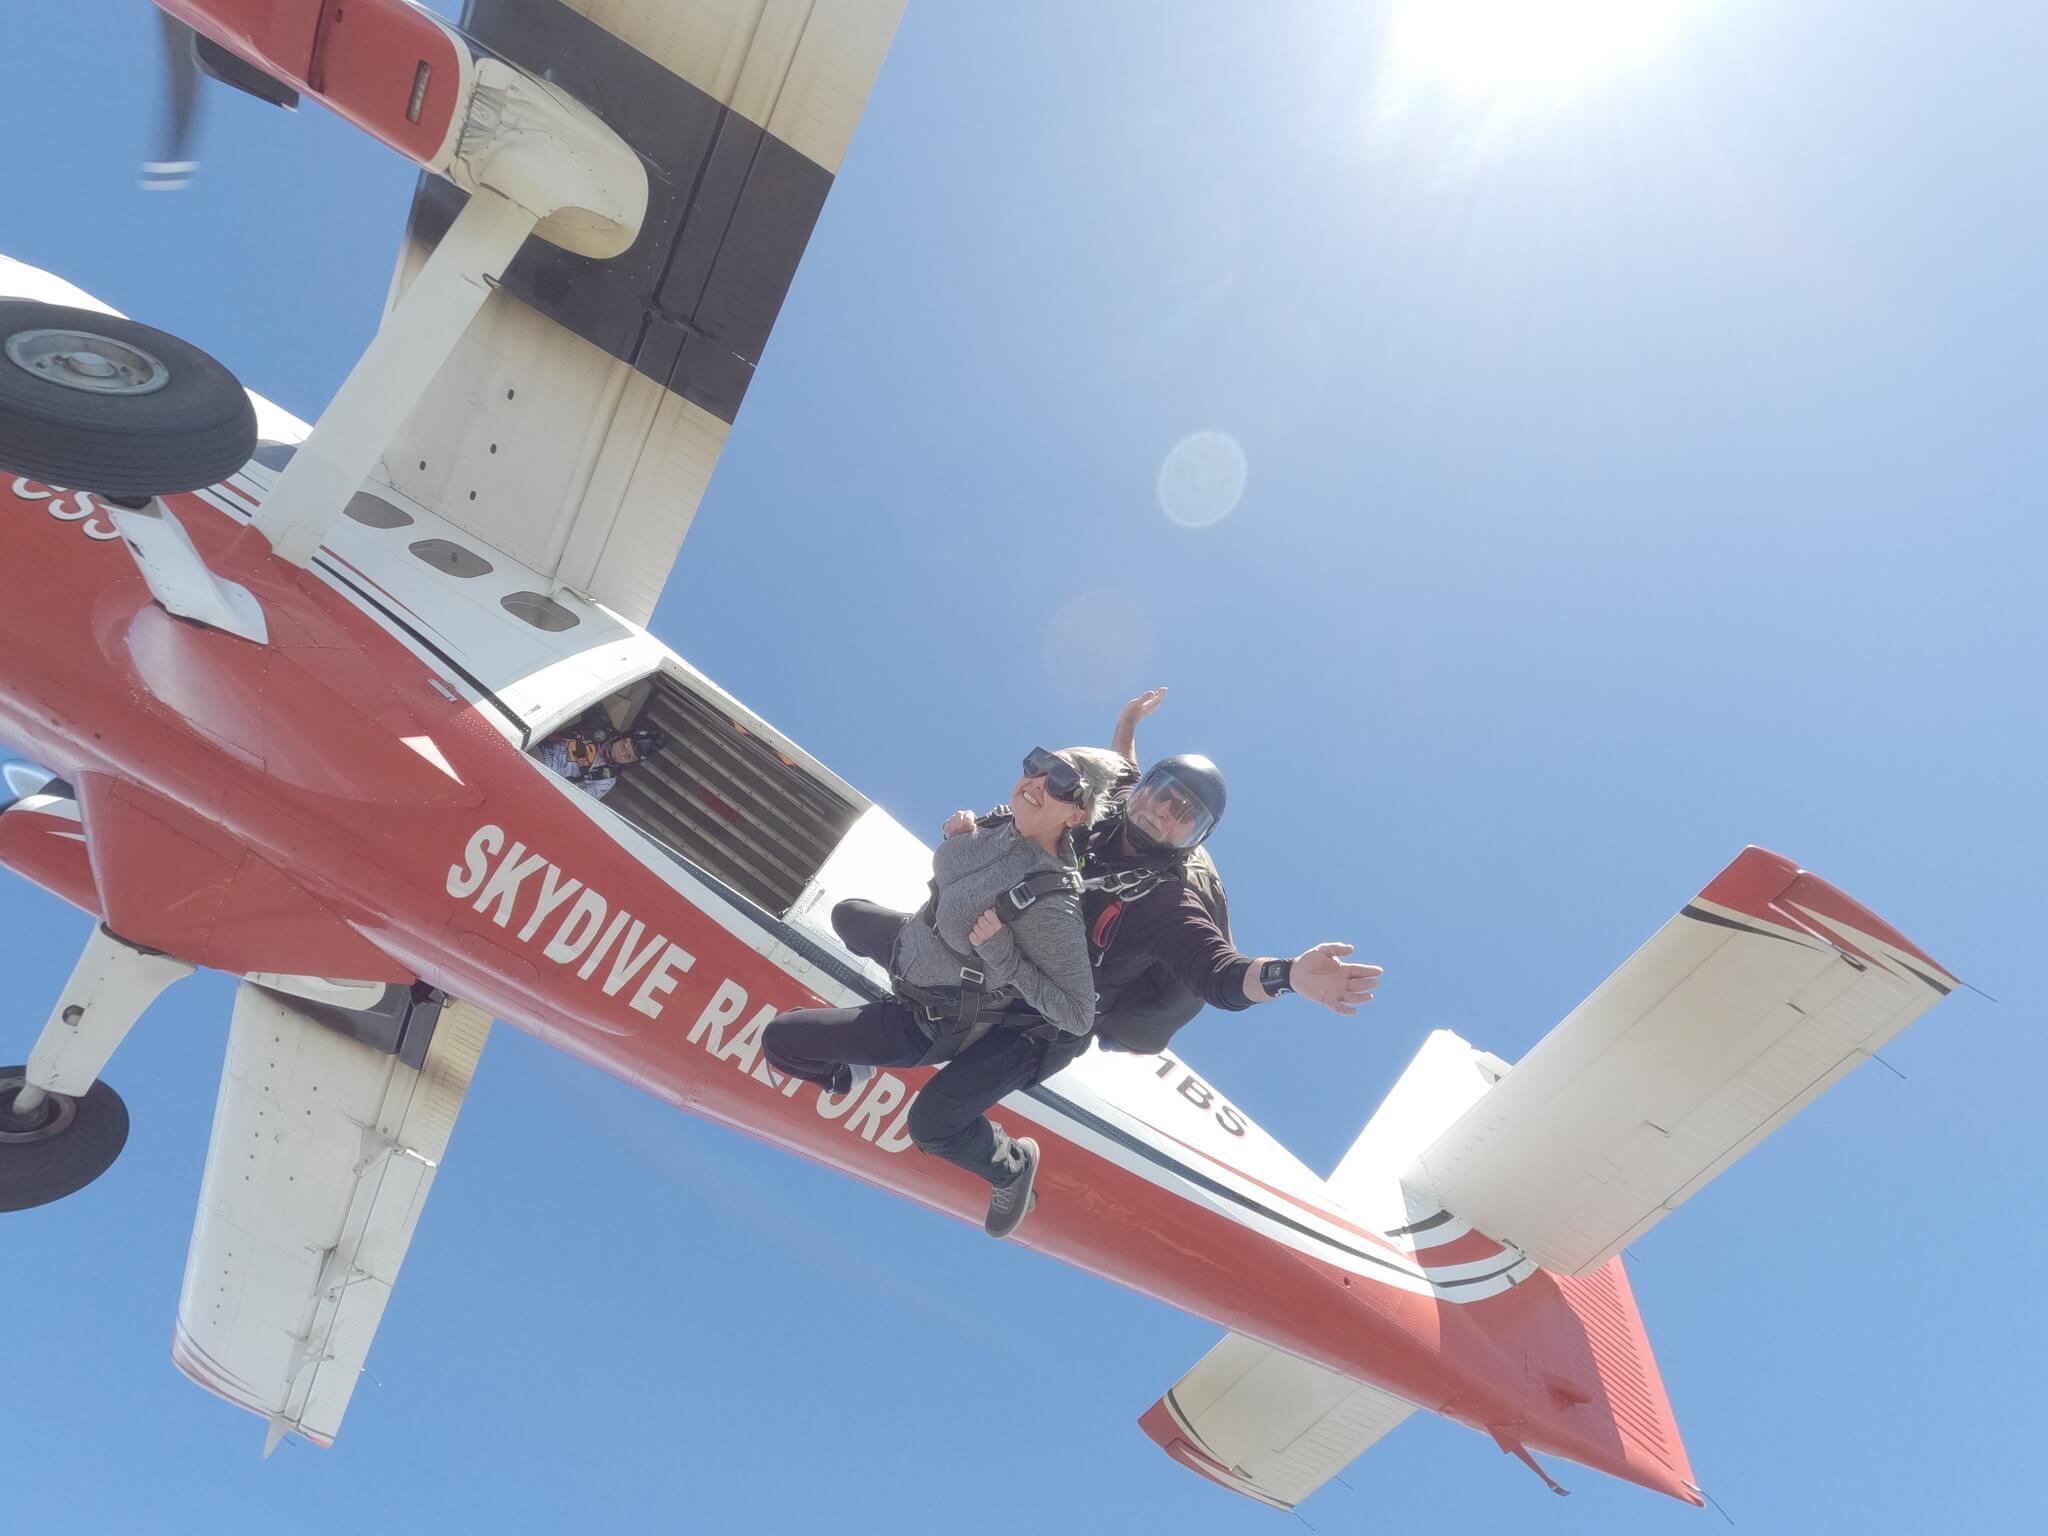 A tandem skydiving pair exiting the airplane